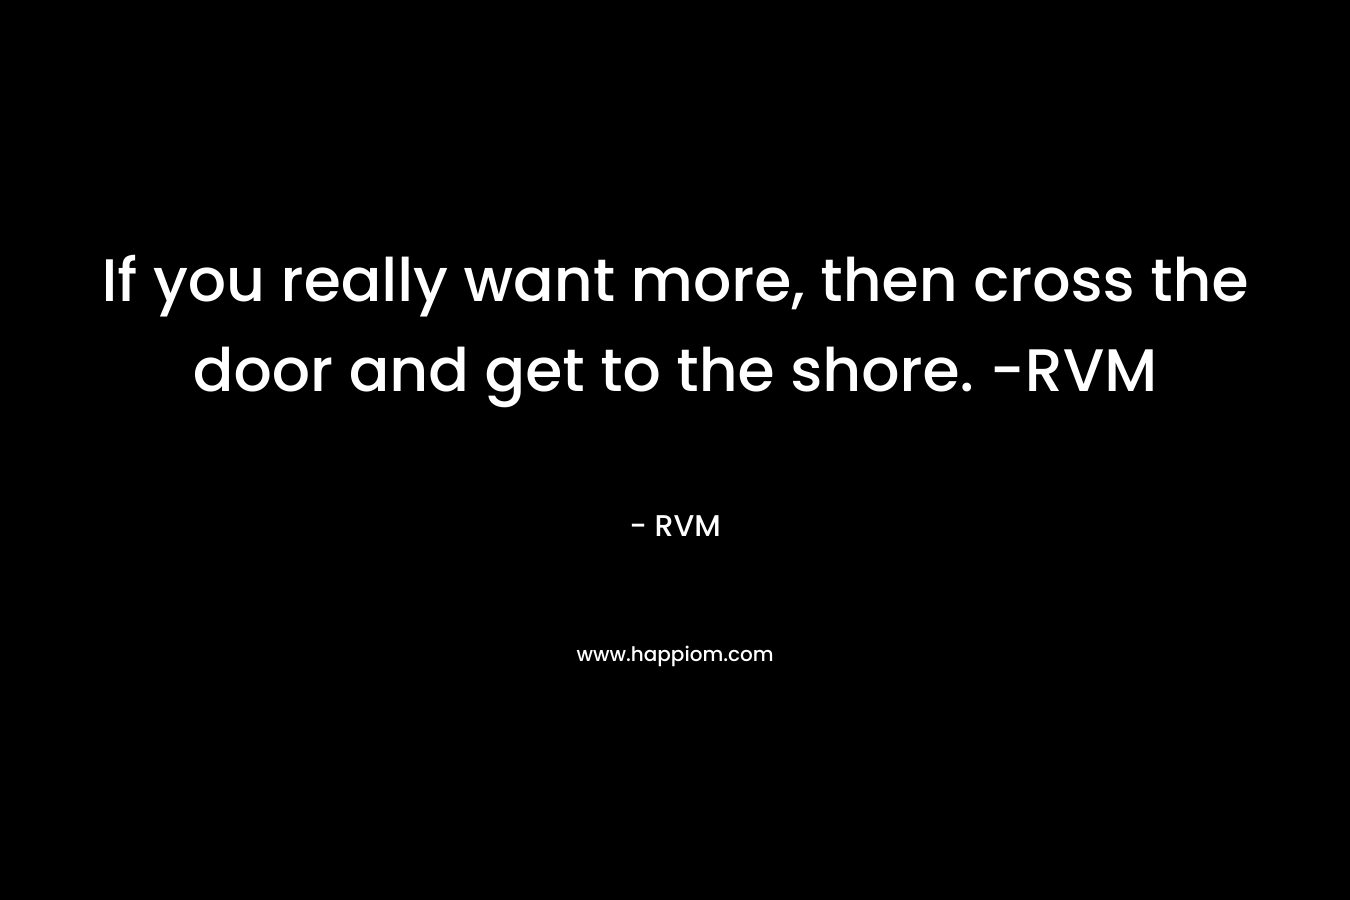 If you really want more, then cross the door and get to the shore. -RVM